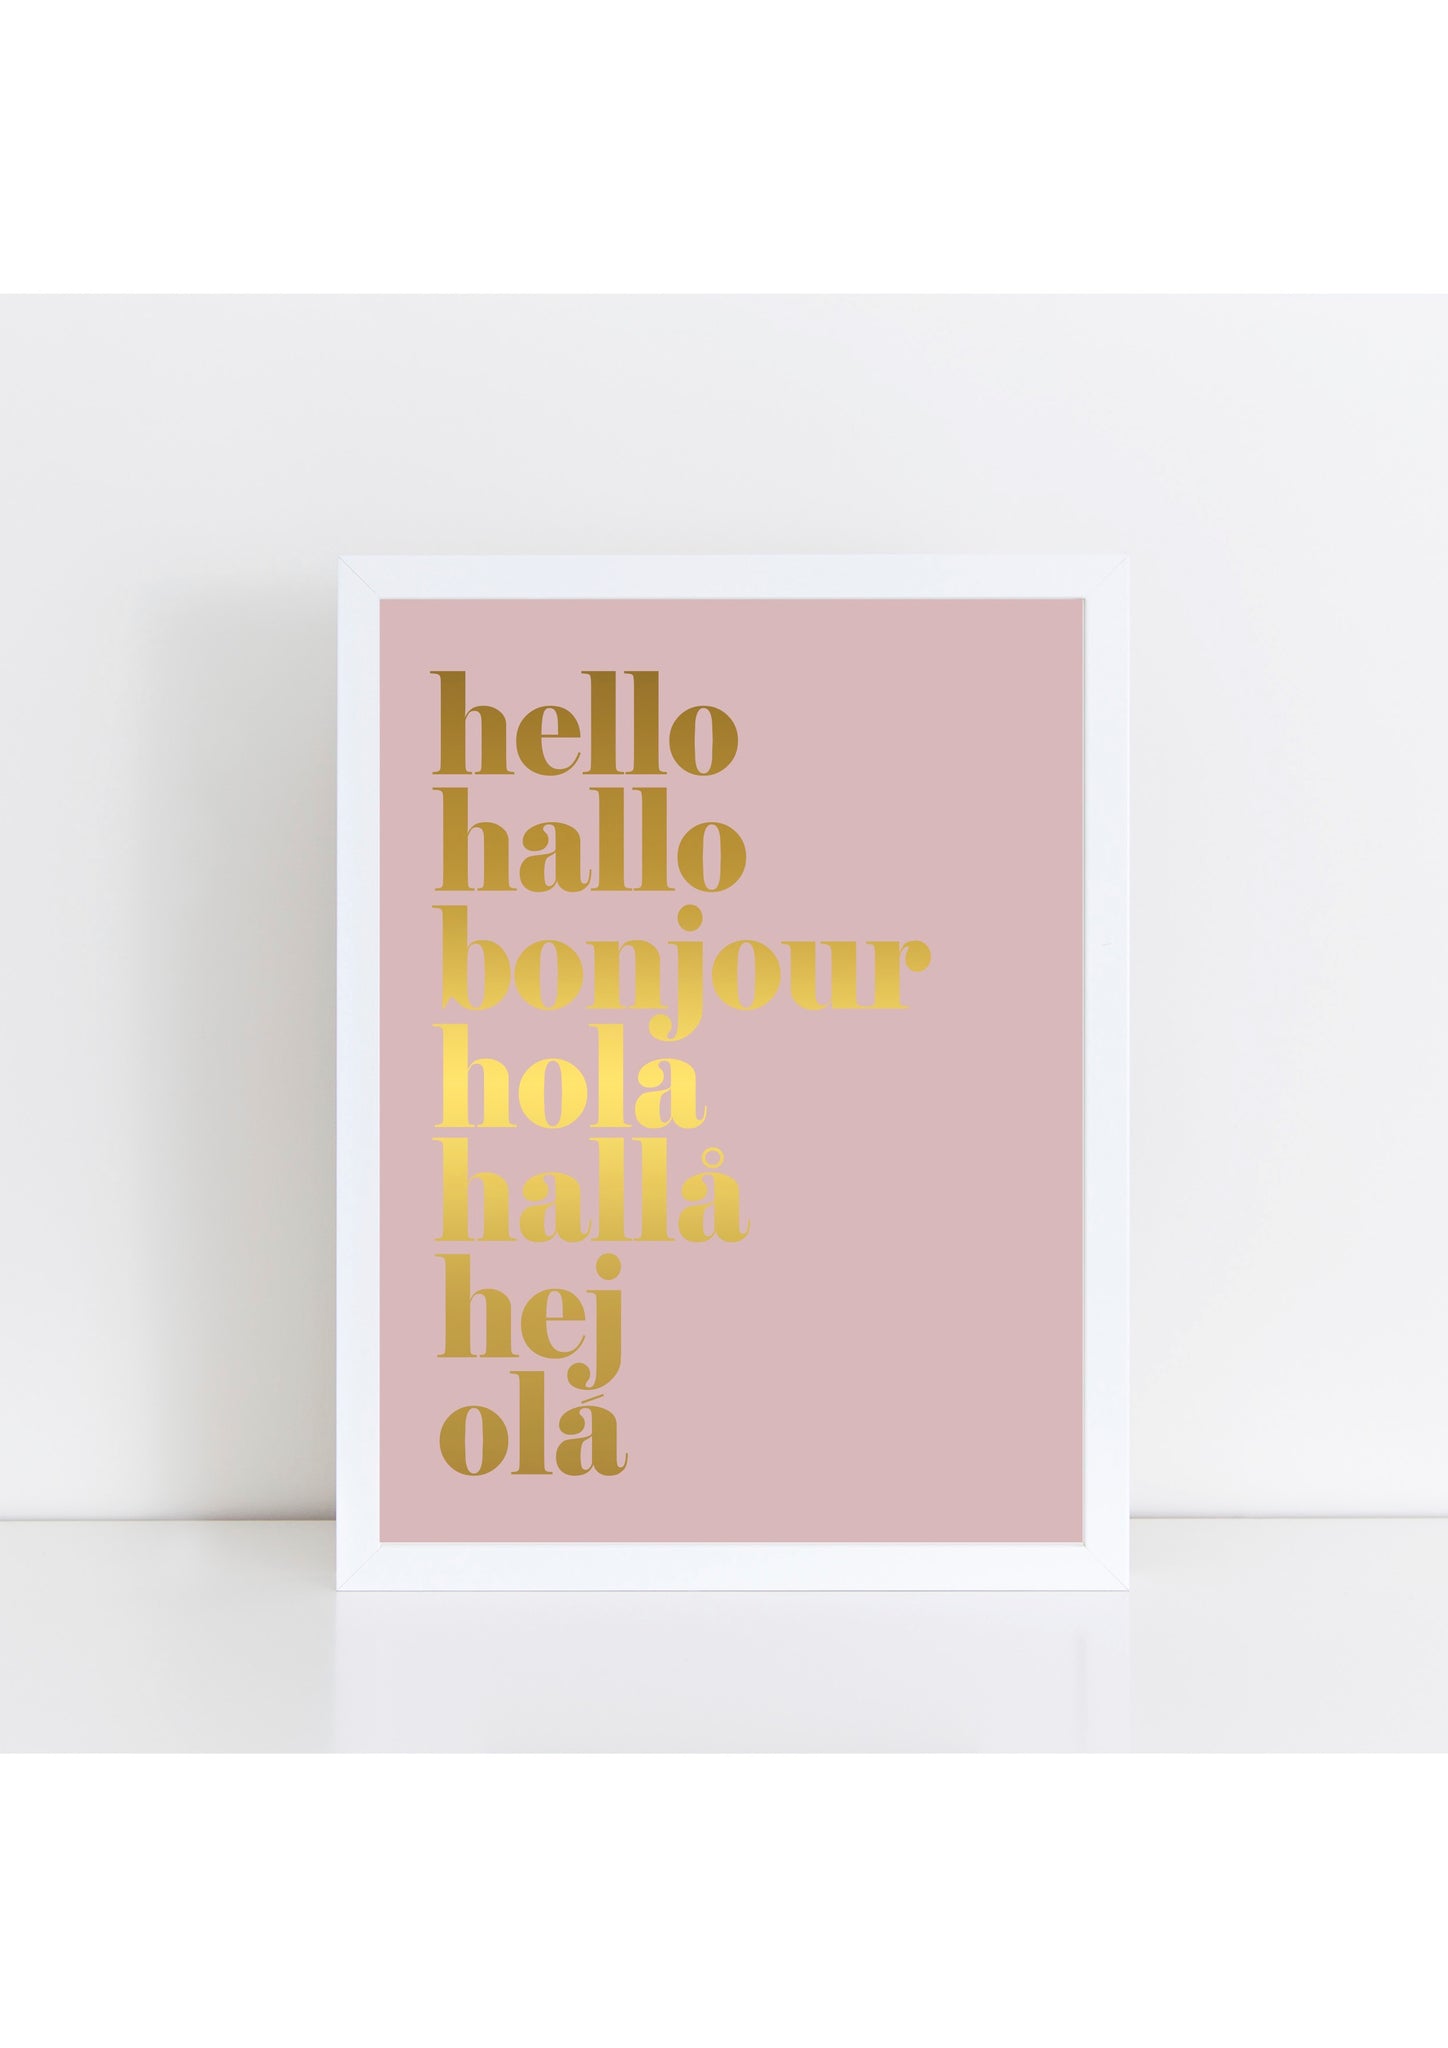 hello hallo -  gold foil on pink - SECONDS PRINTS